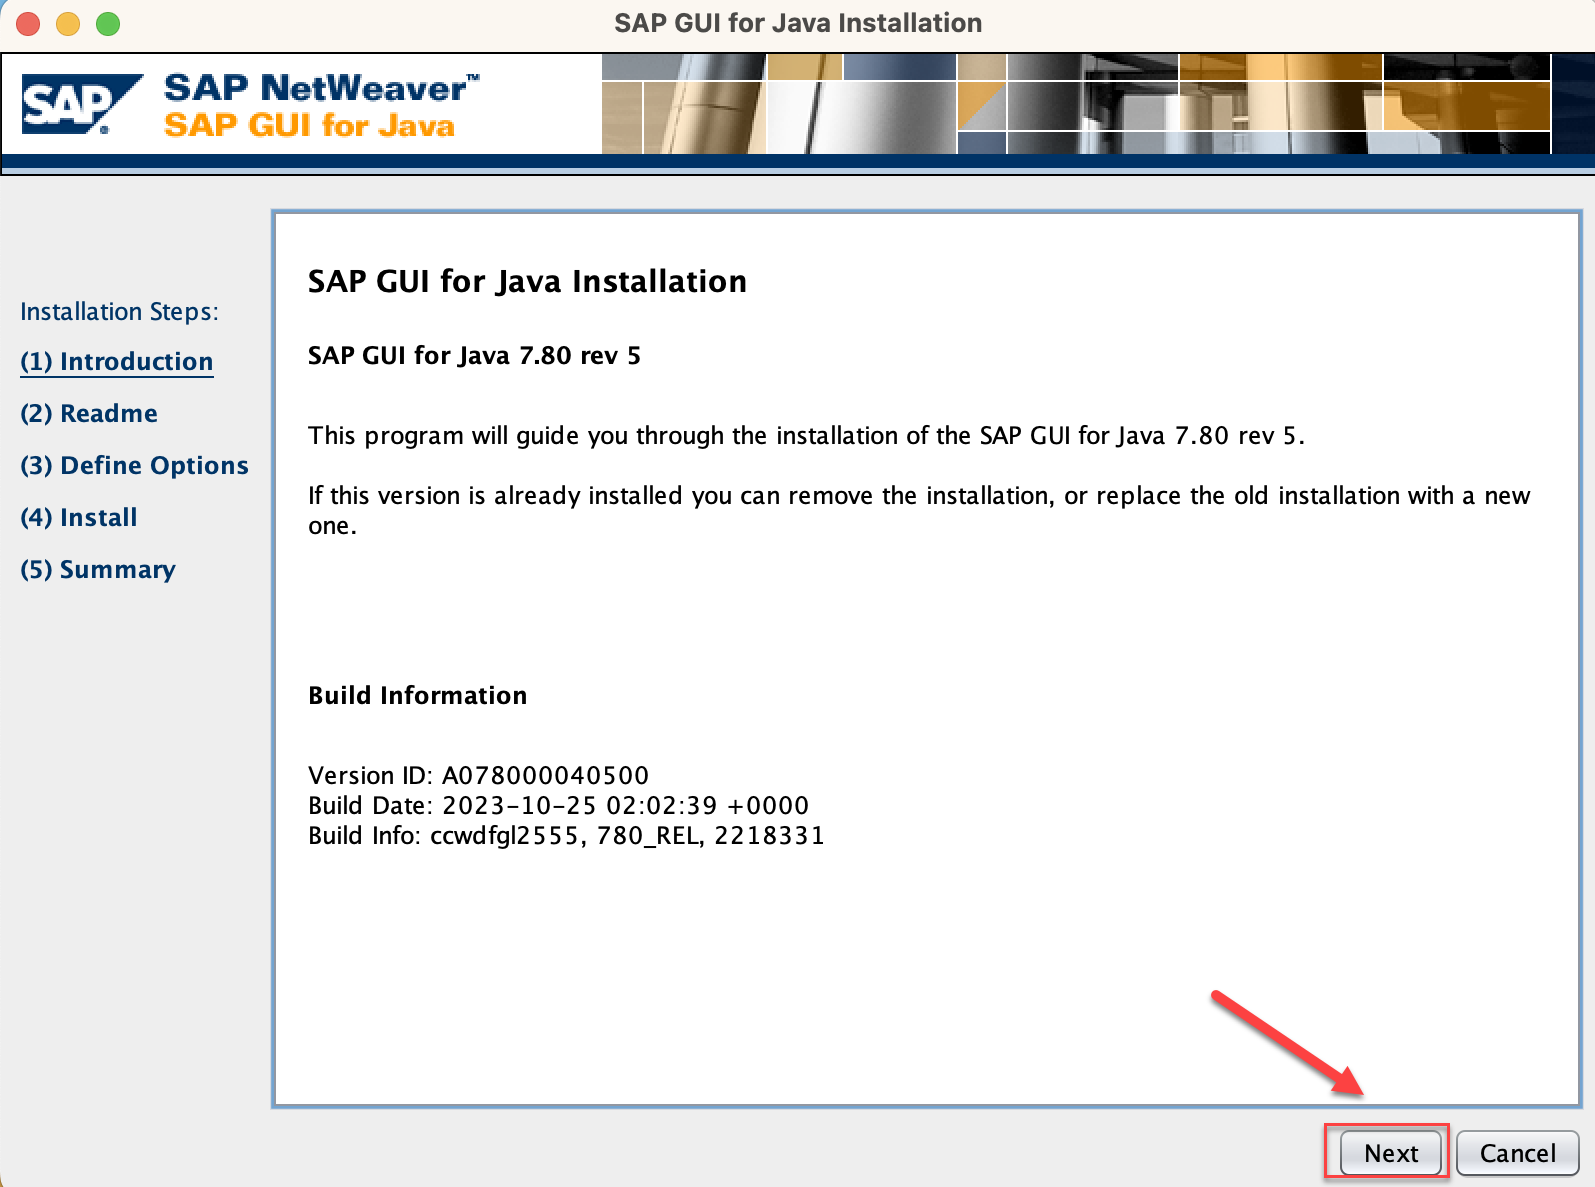 SAP GUI for Java read me notes